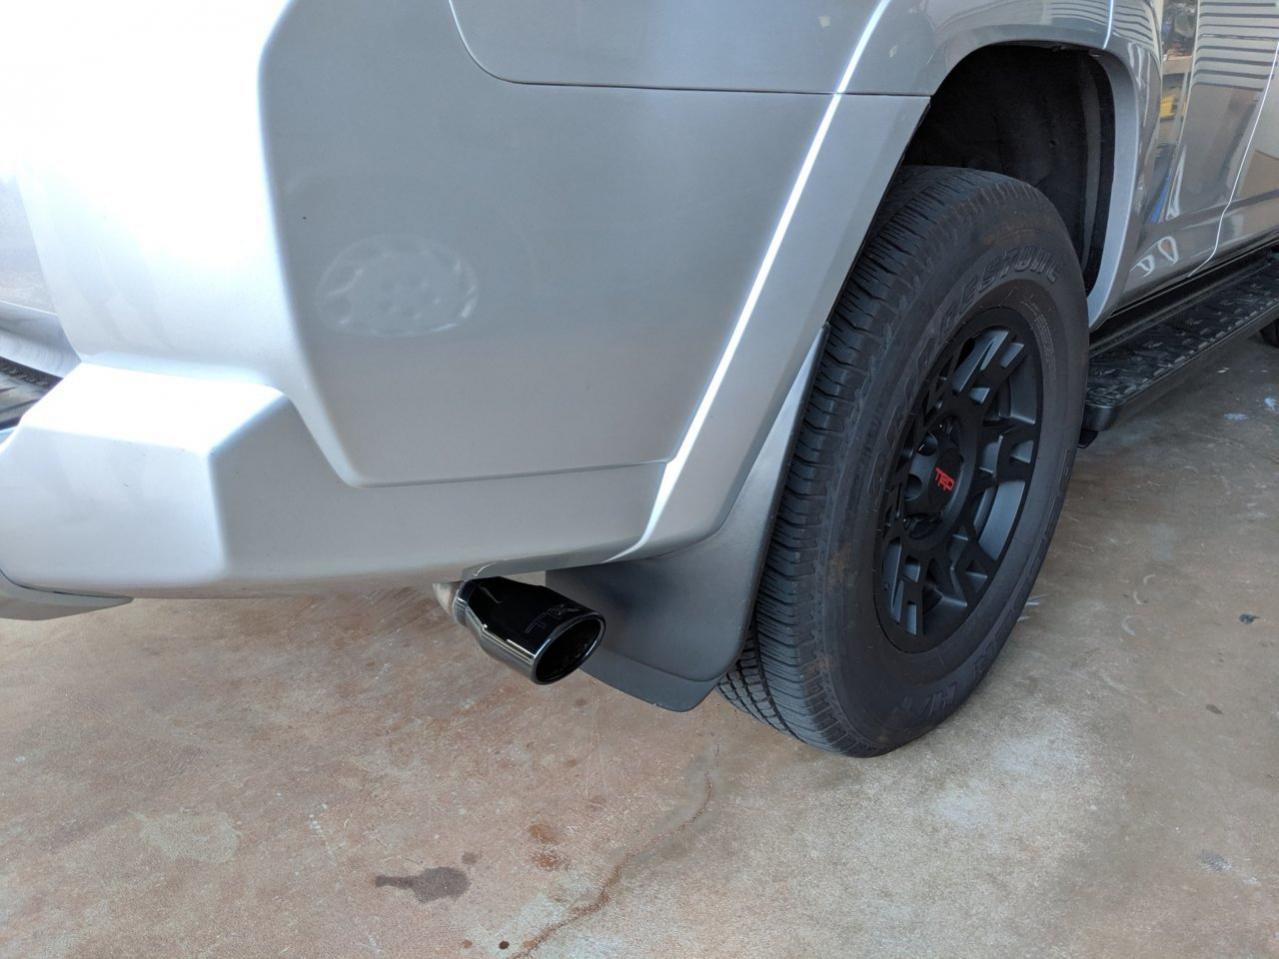 TRD Exhaust - Available in 2020 M.Y.-img_20190829_181312-jpg